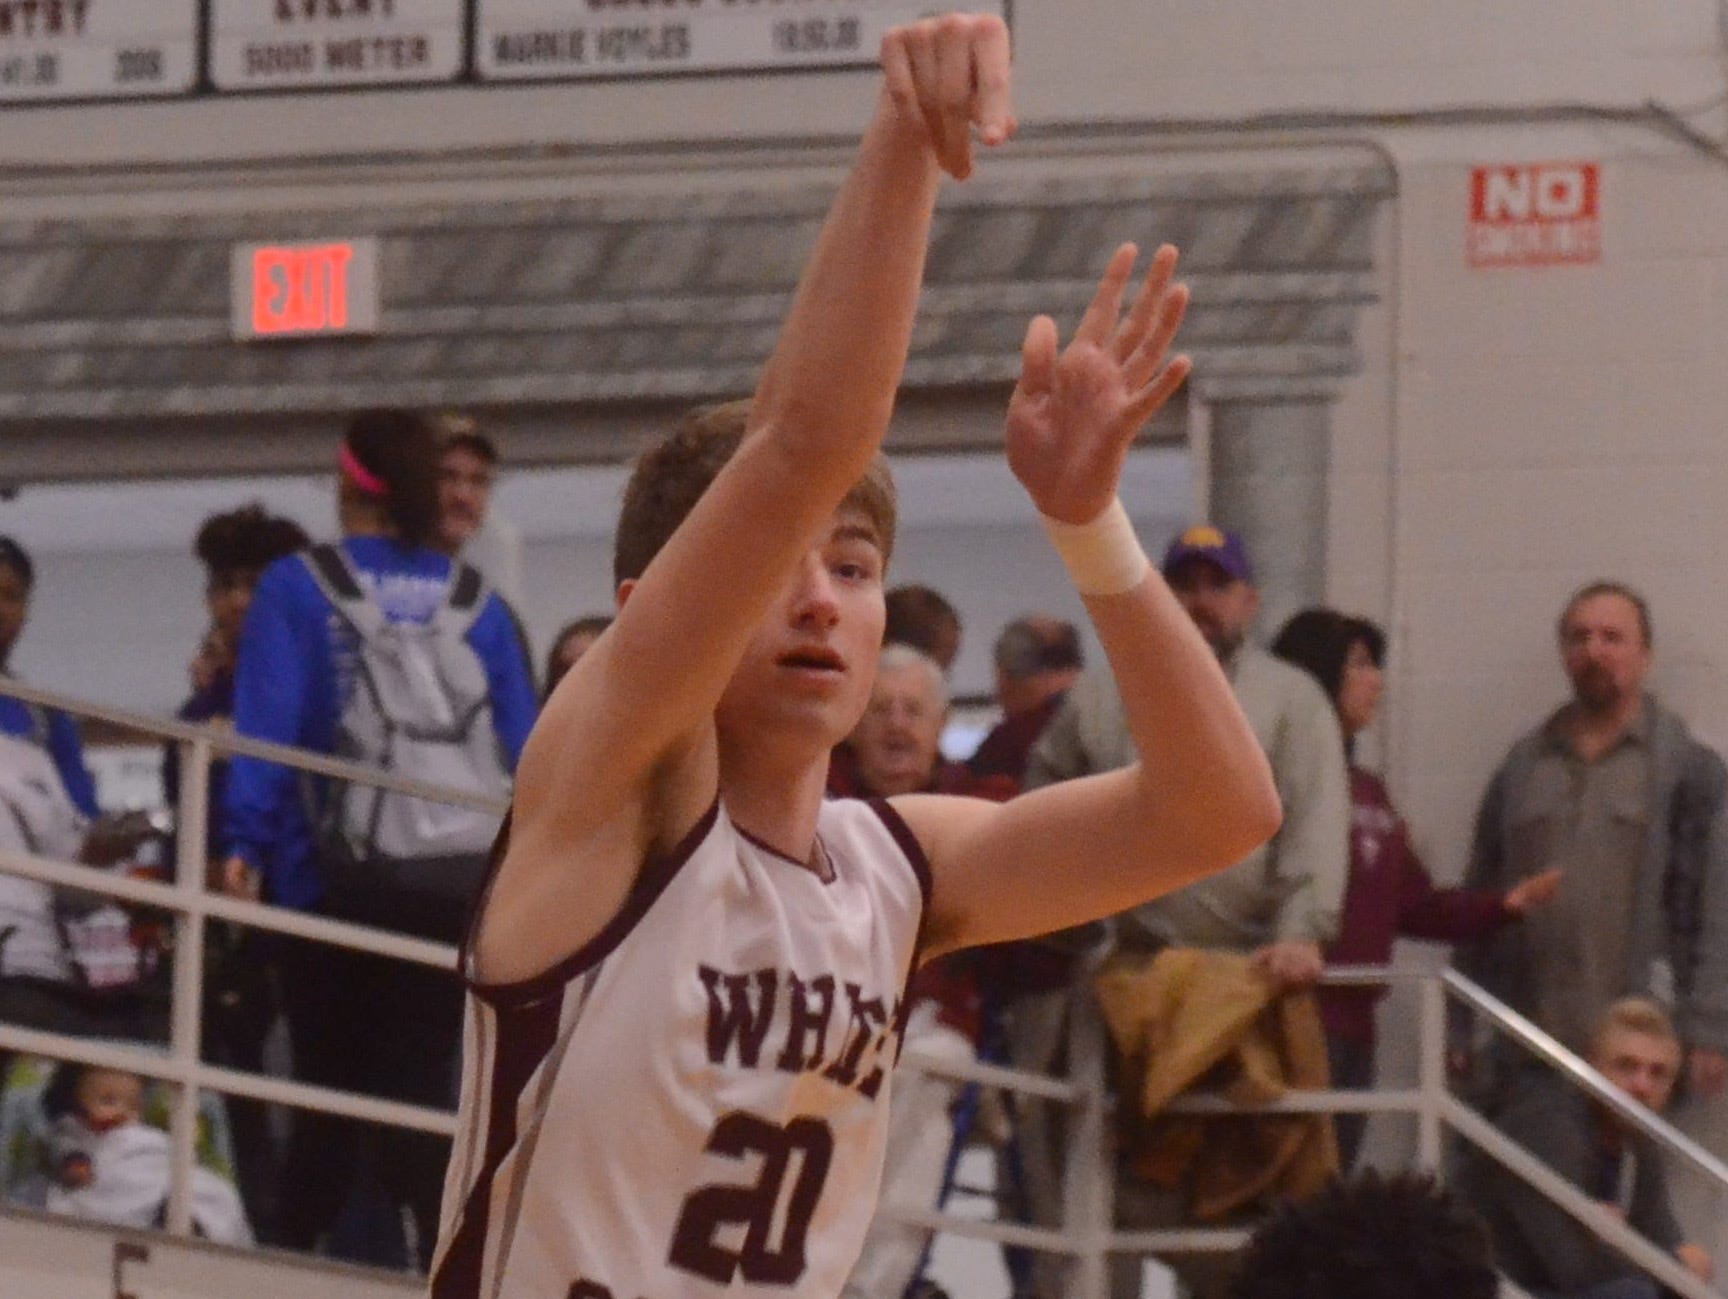 White County's Pierce Whited, who is averaging a team-leading 20 points per game, has knocked down over 100 3-pointers on the season.